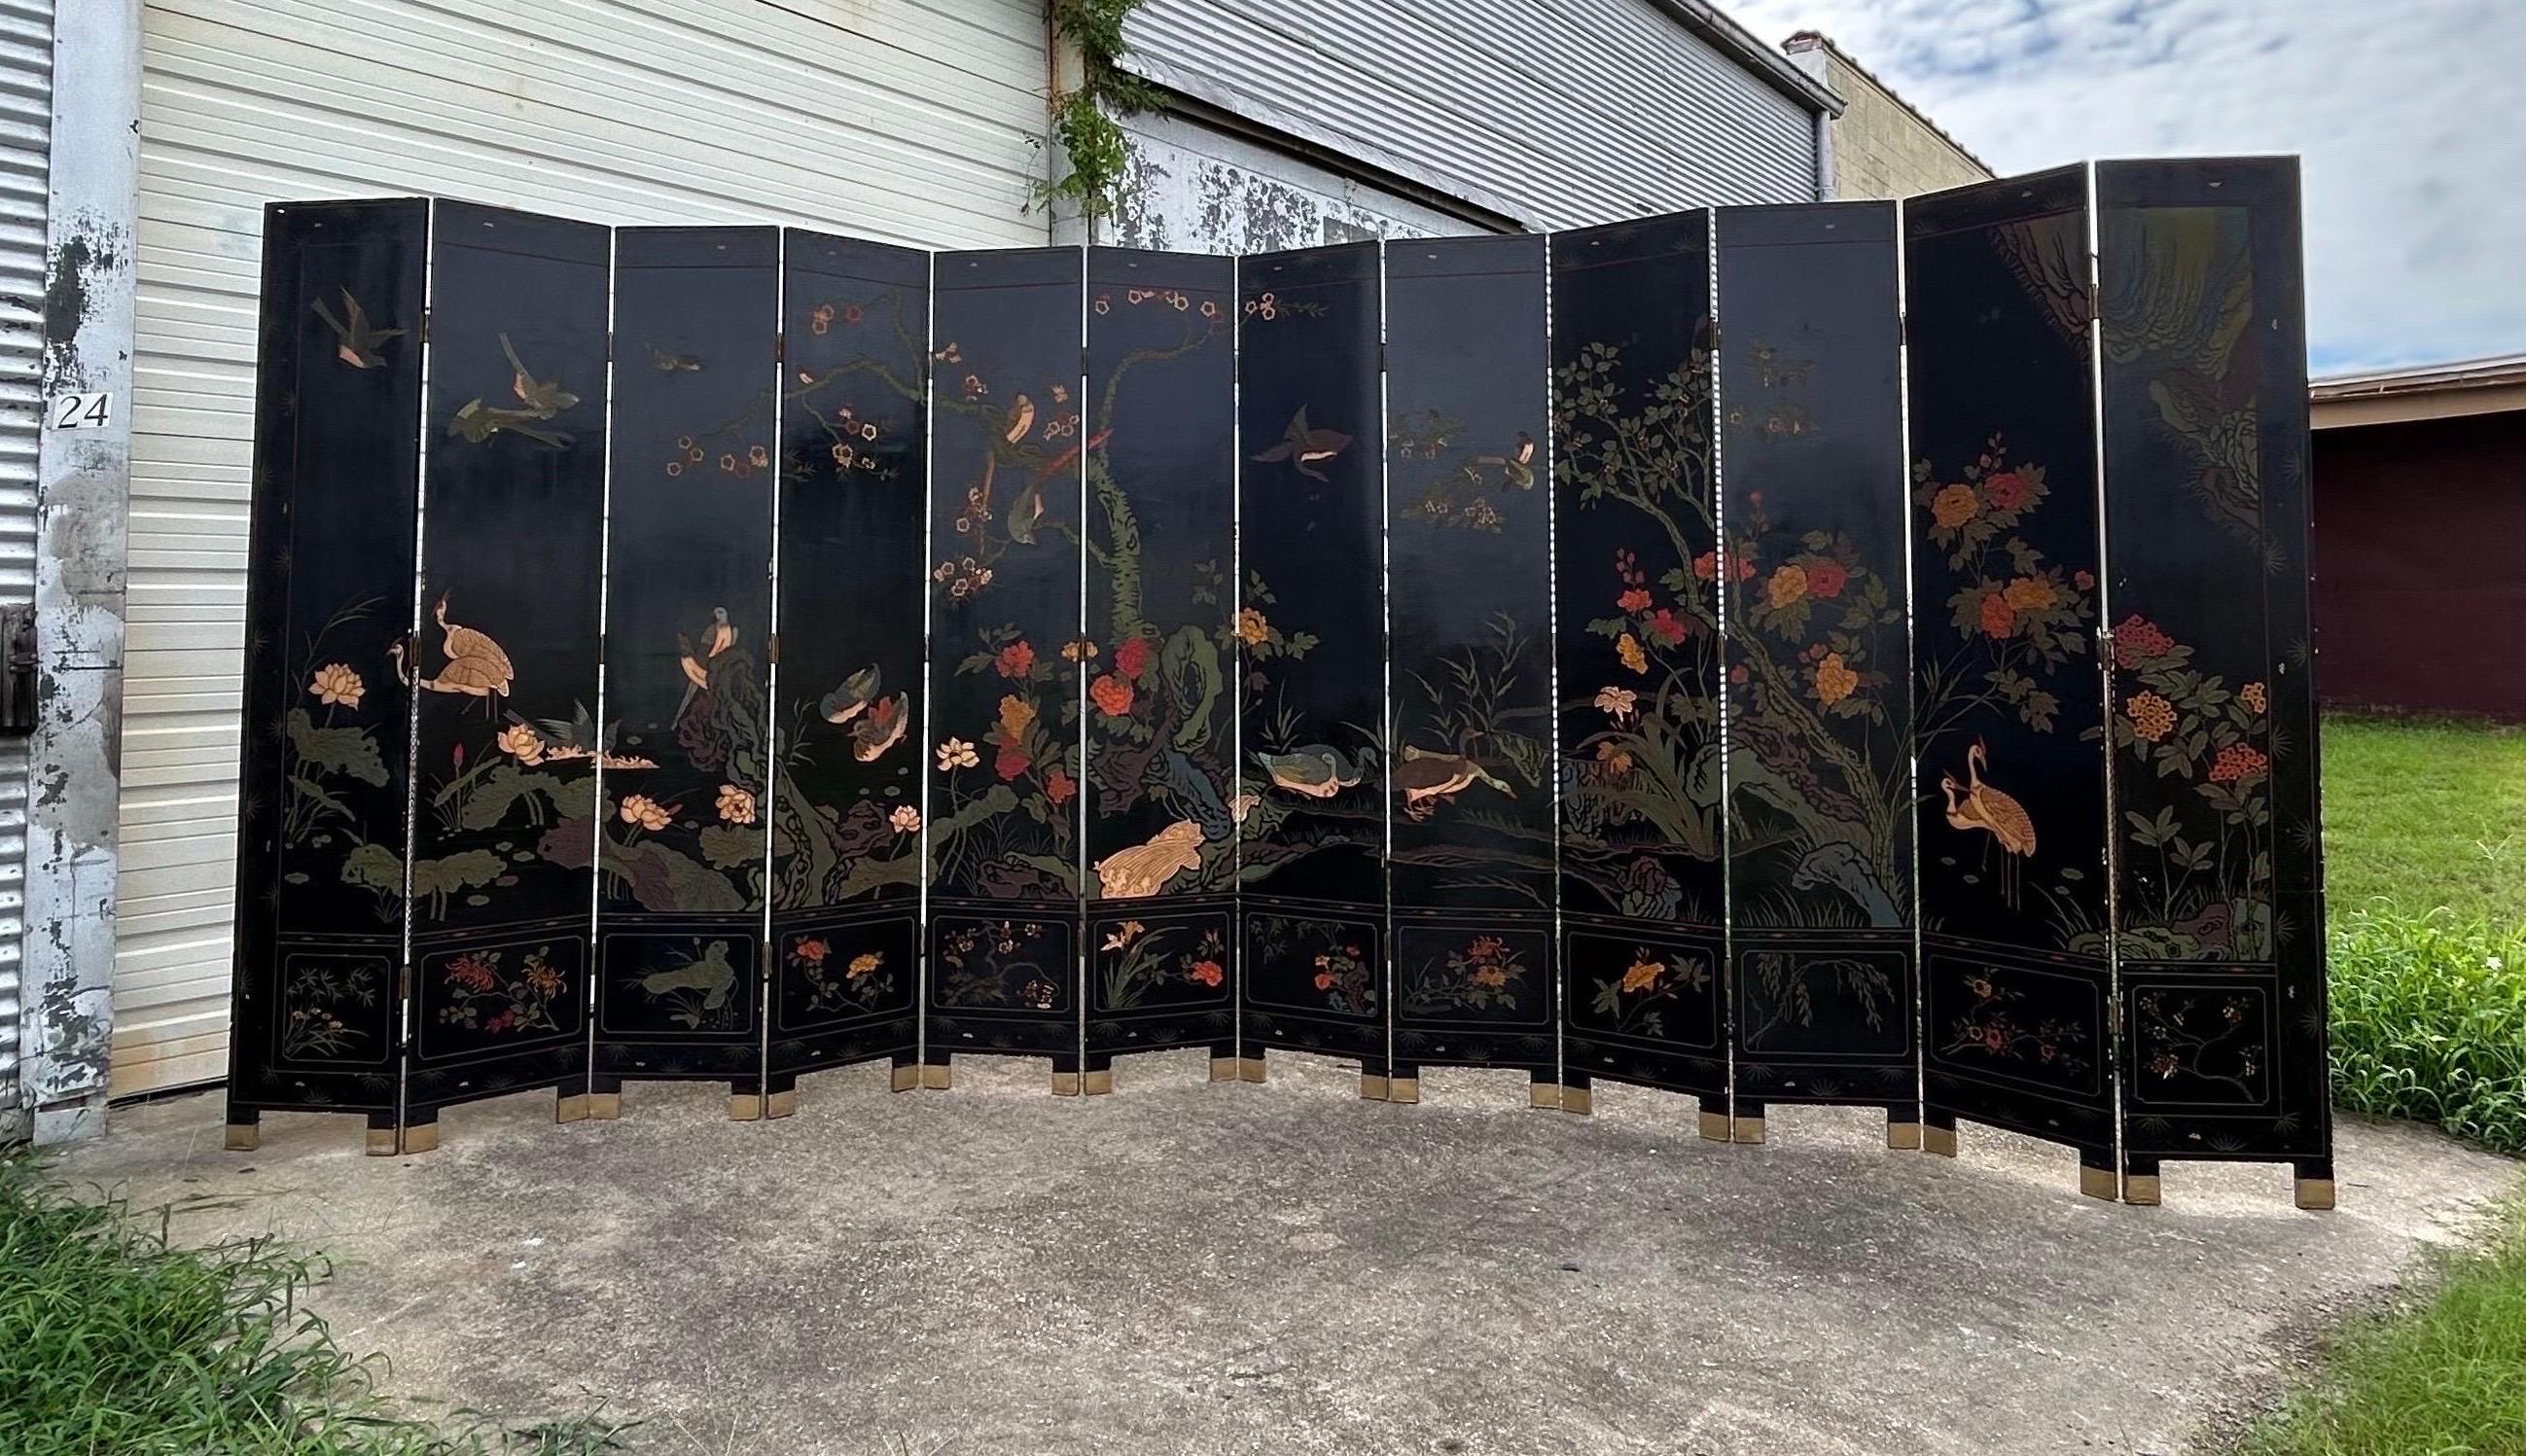 Incredible large scale 12 panel chinoiserie double sided screen. Great size and scale- could cover an entire 18’ wall.